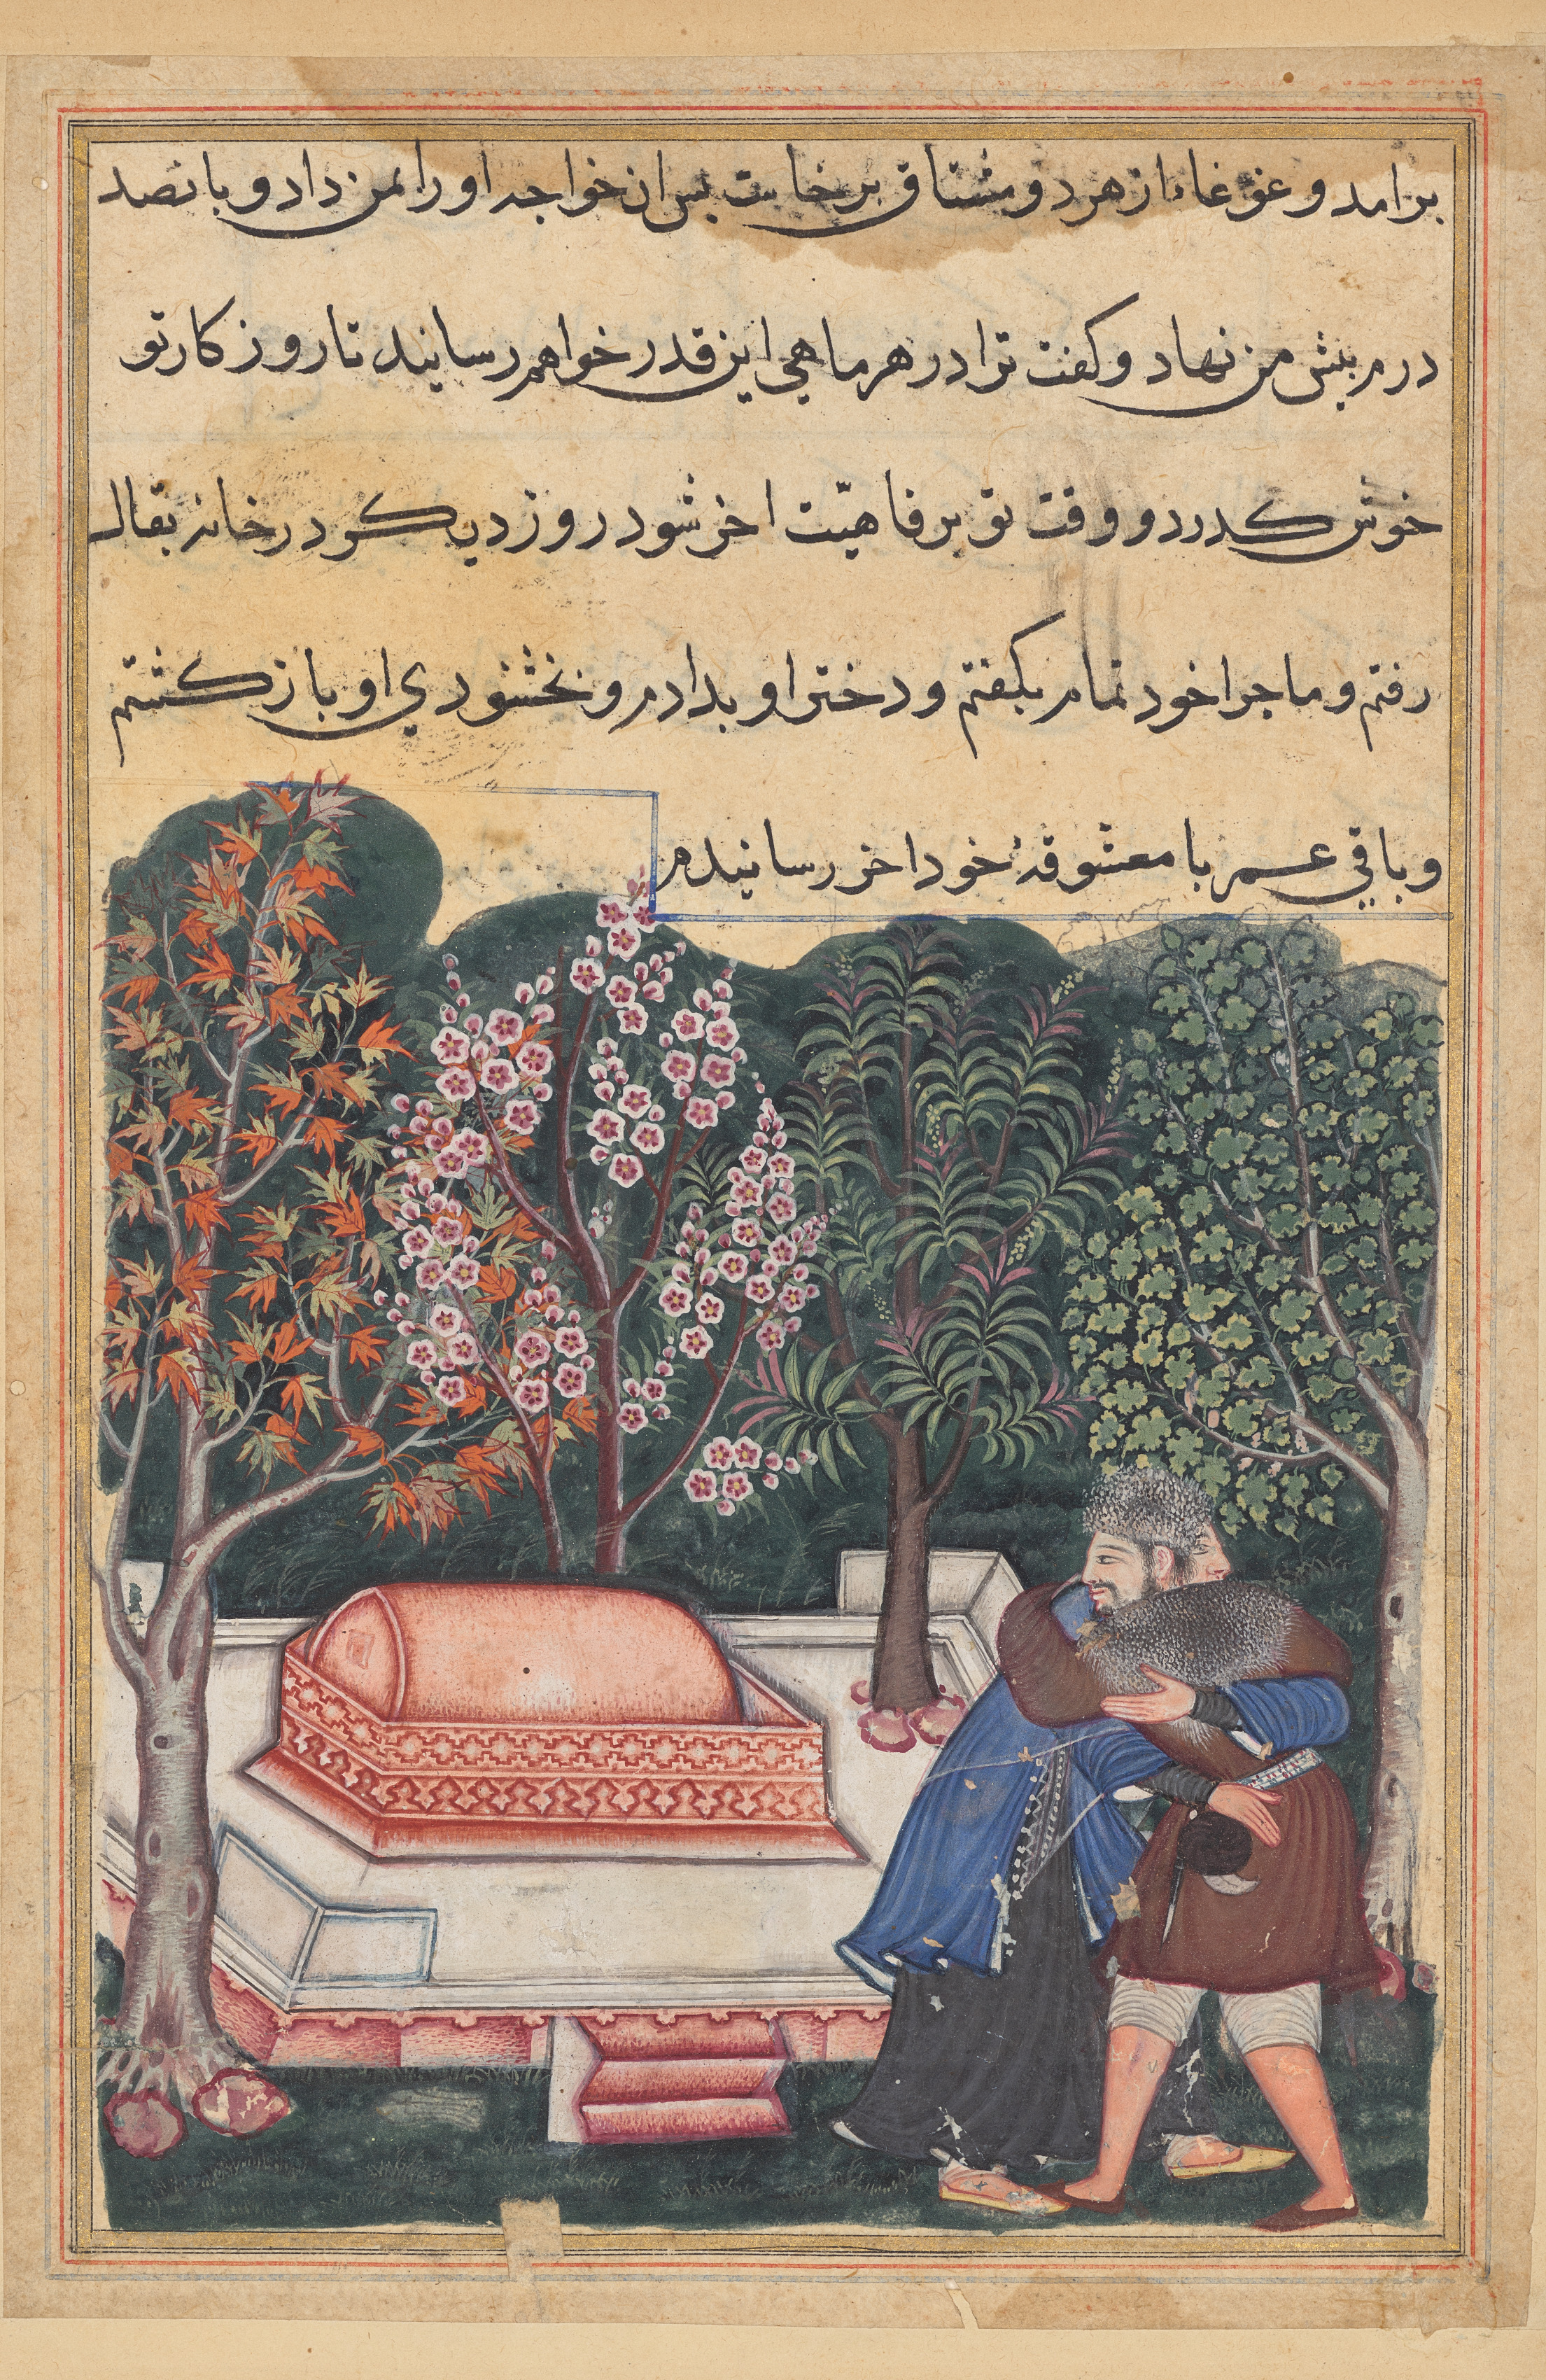 The young man of Baghdad reunited with his slave-girl, from a Tuti-nama (Tales of a Parrot): Forty-eighth Night